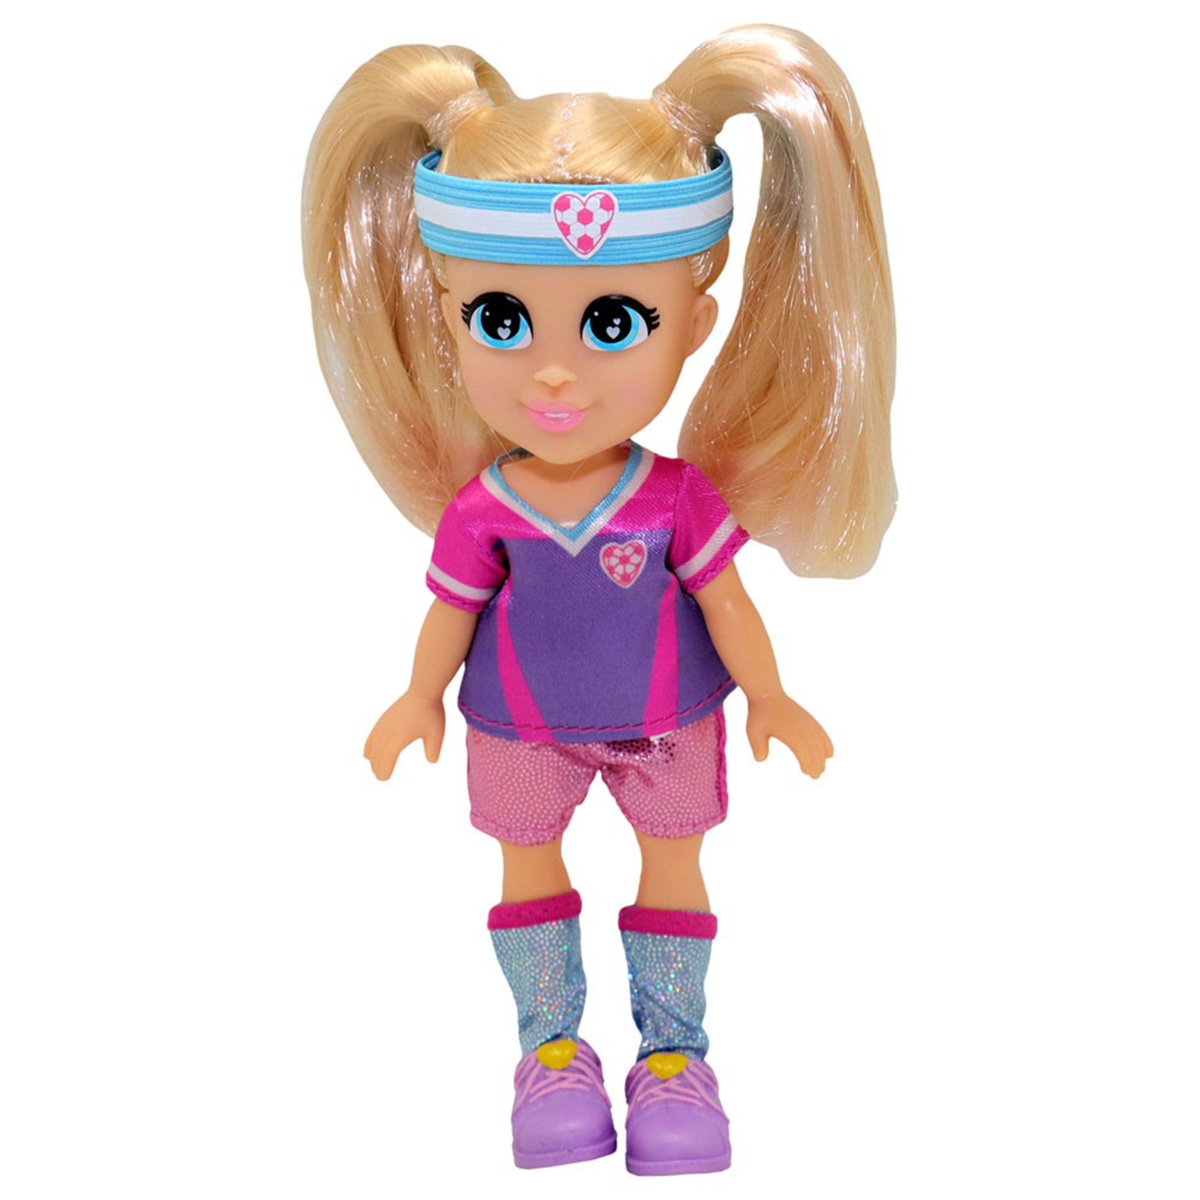 Love Diana Soccer Star Doll, 6 inches, Pink, 20517